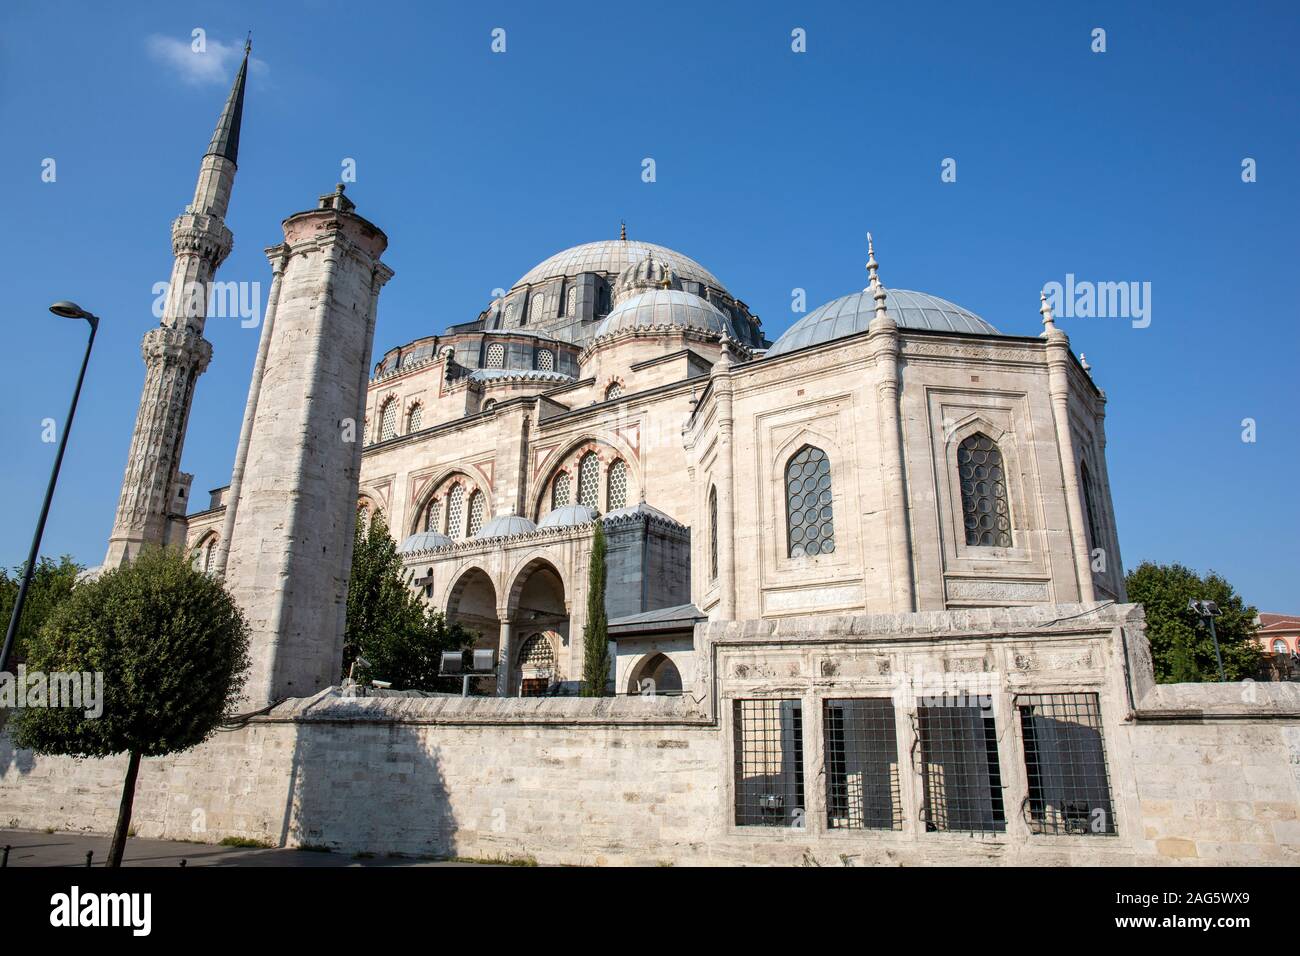 Sehzade mosque in Istanbul, Turkey. Stock Photo